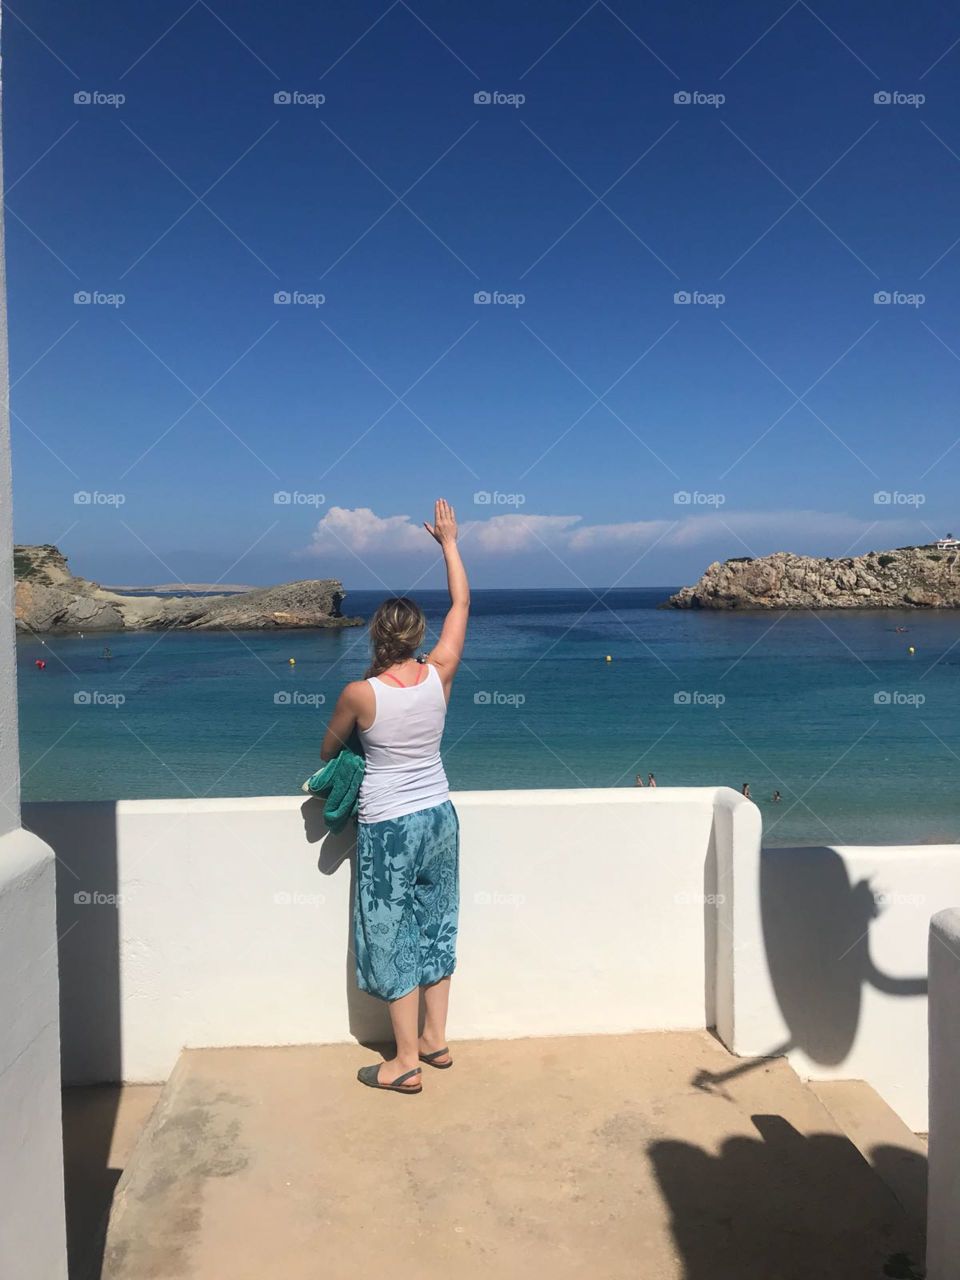 Women waves out to sea on a beautiful day in menorca 